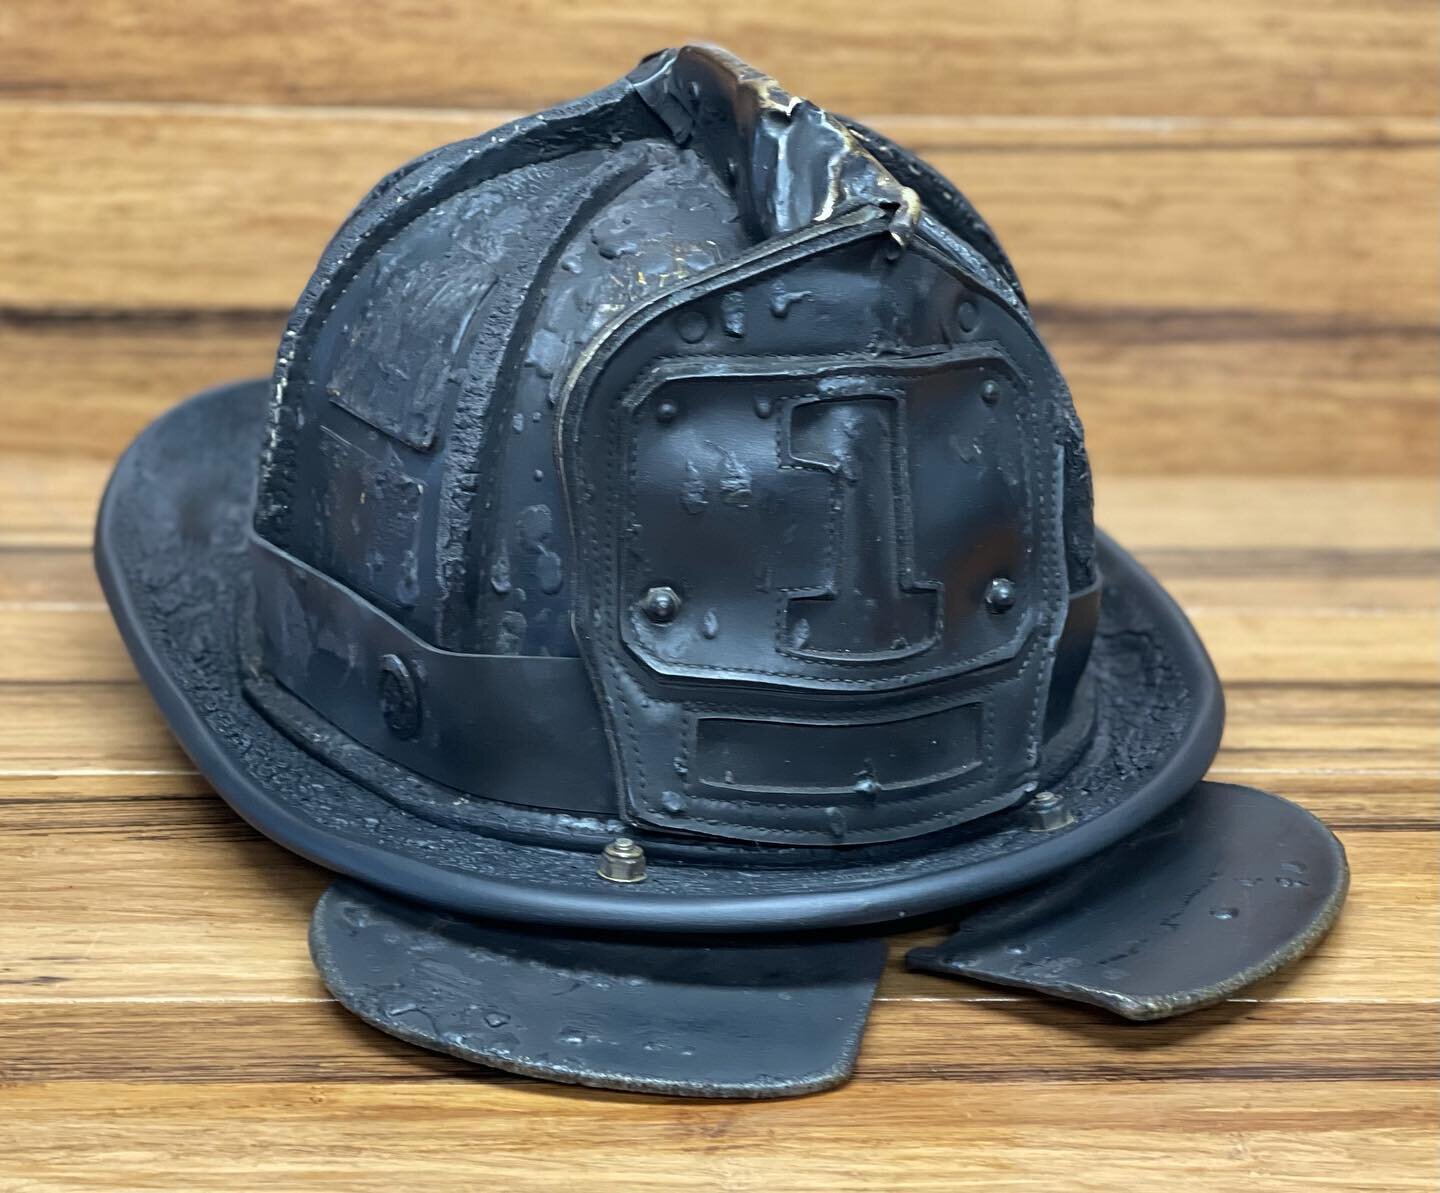 N5A with extensive brim damage came in to be made back into a helmet. First set of pics show the after and last few are when in was in pieces. This was a budget repair and it we were not suppose to steal the character of the helmet.

Repair list is s